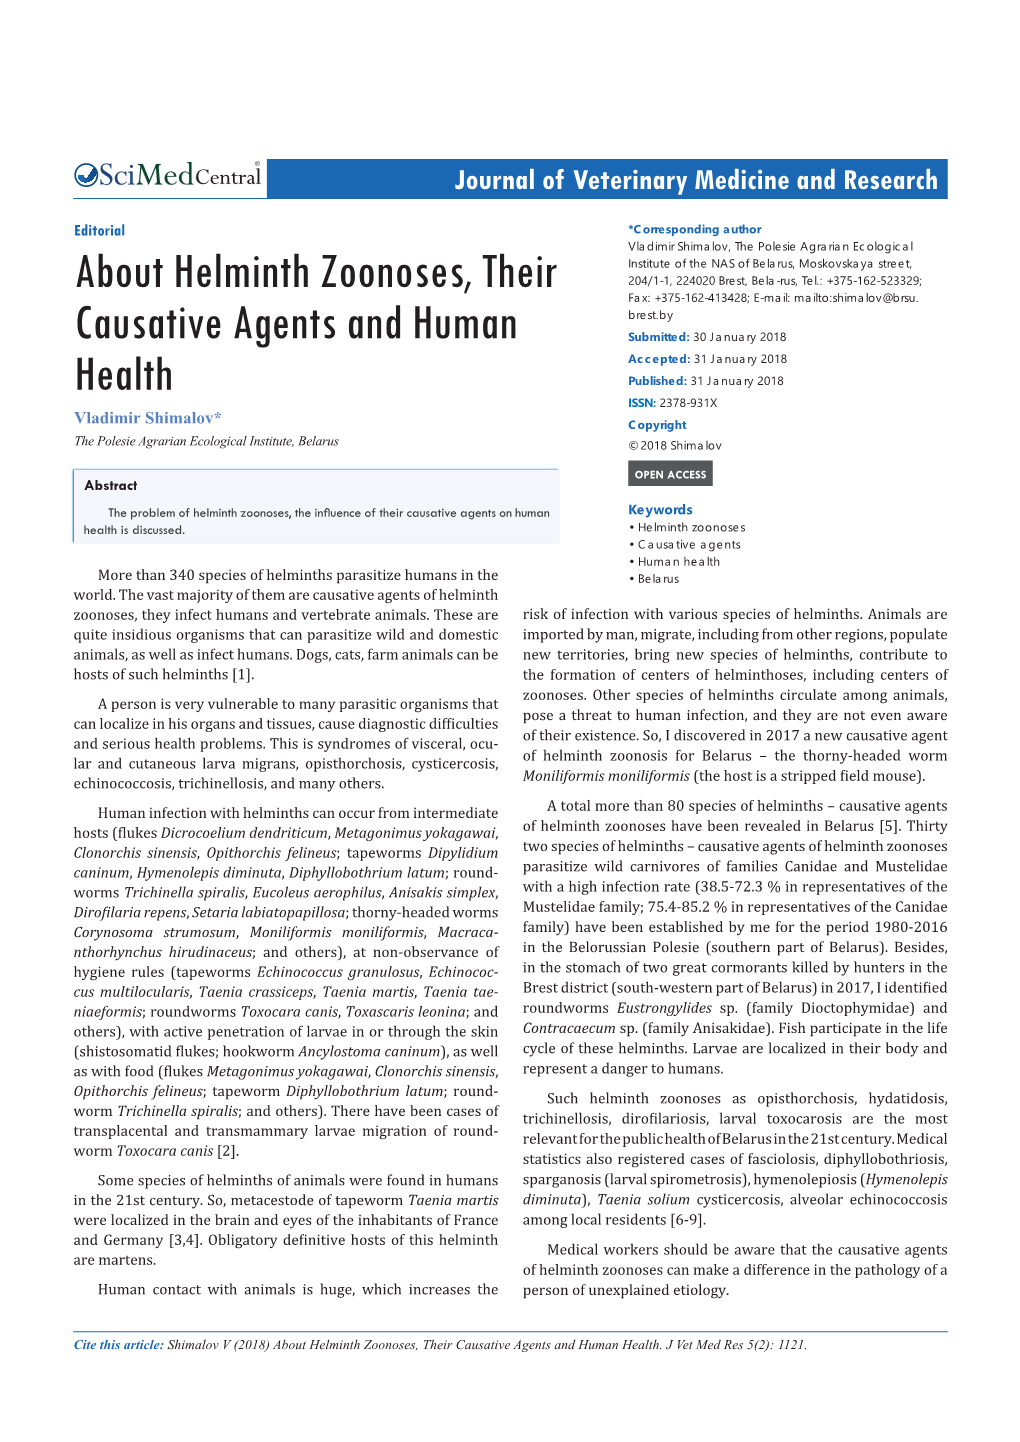 About Helminth Zoonoses, Their Causative Agents and Human Health